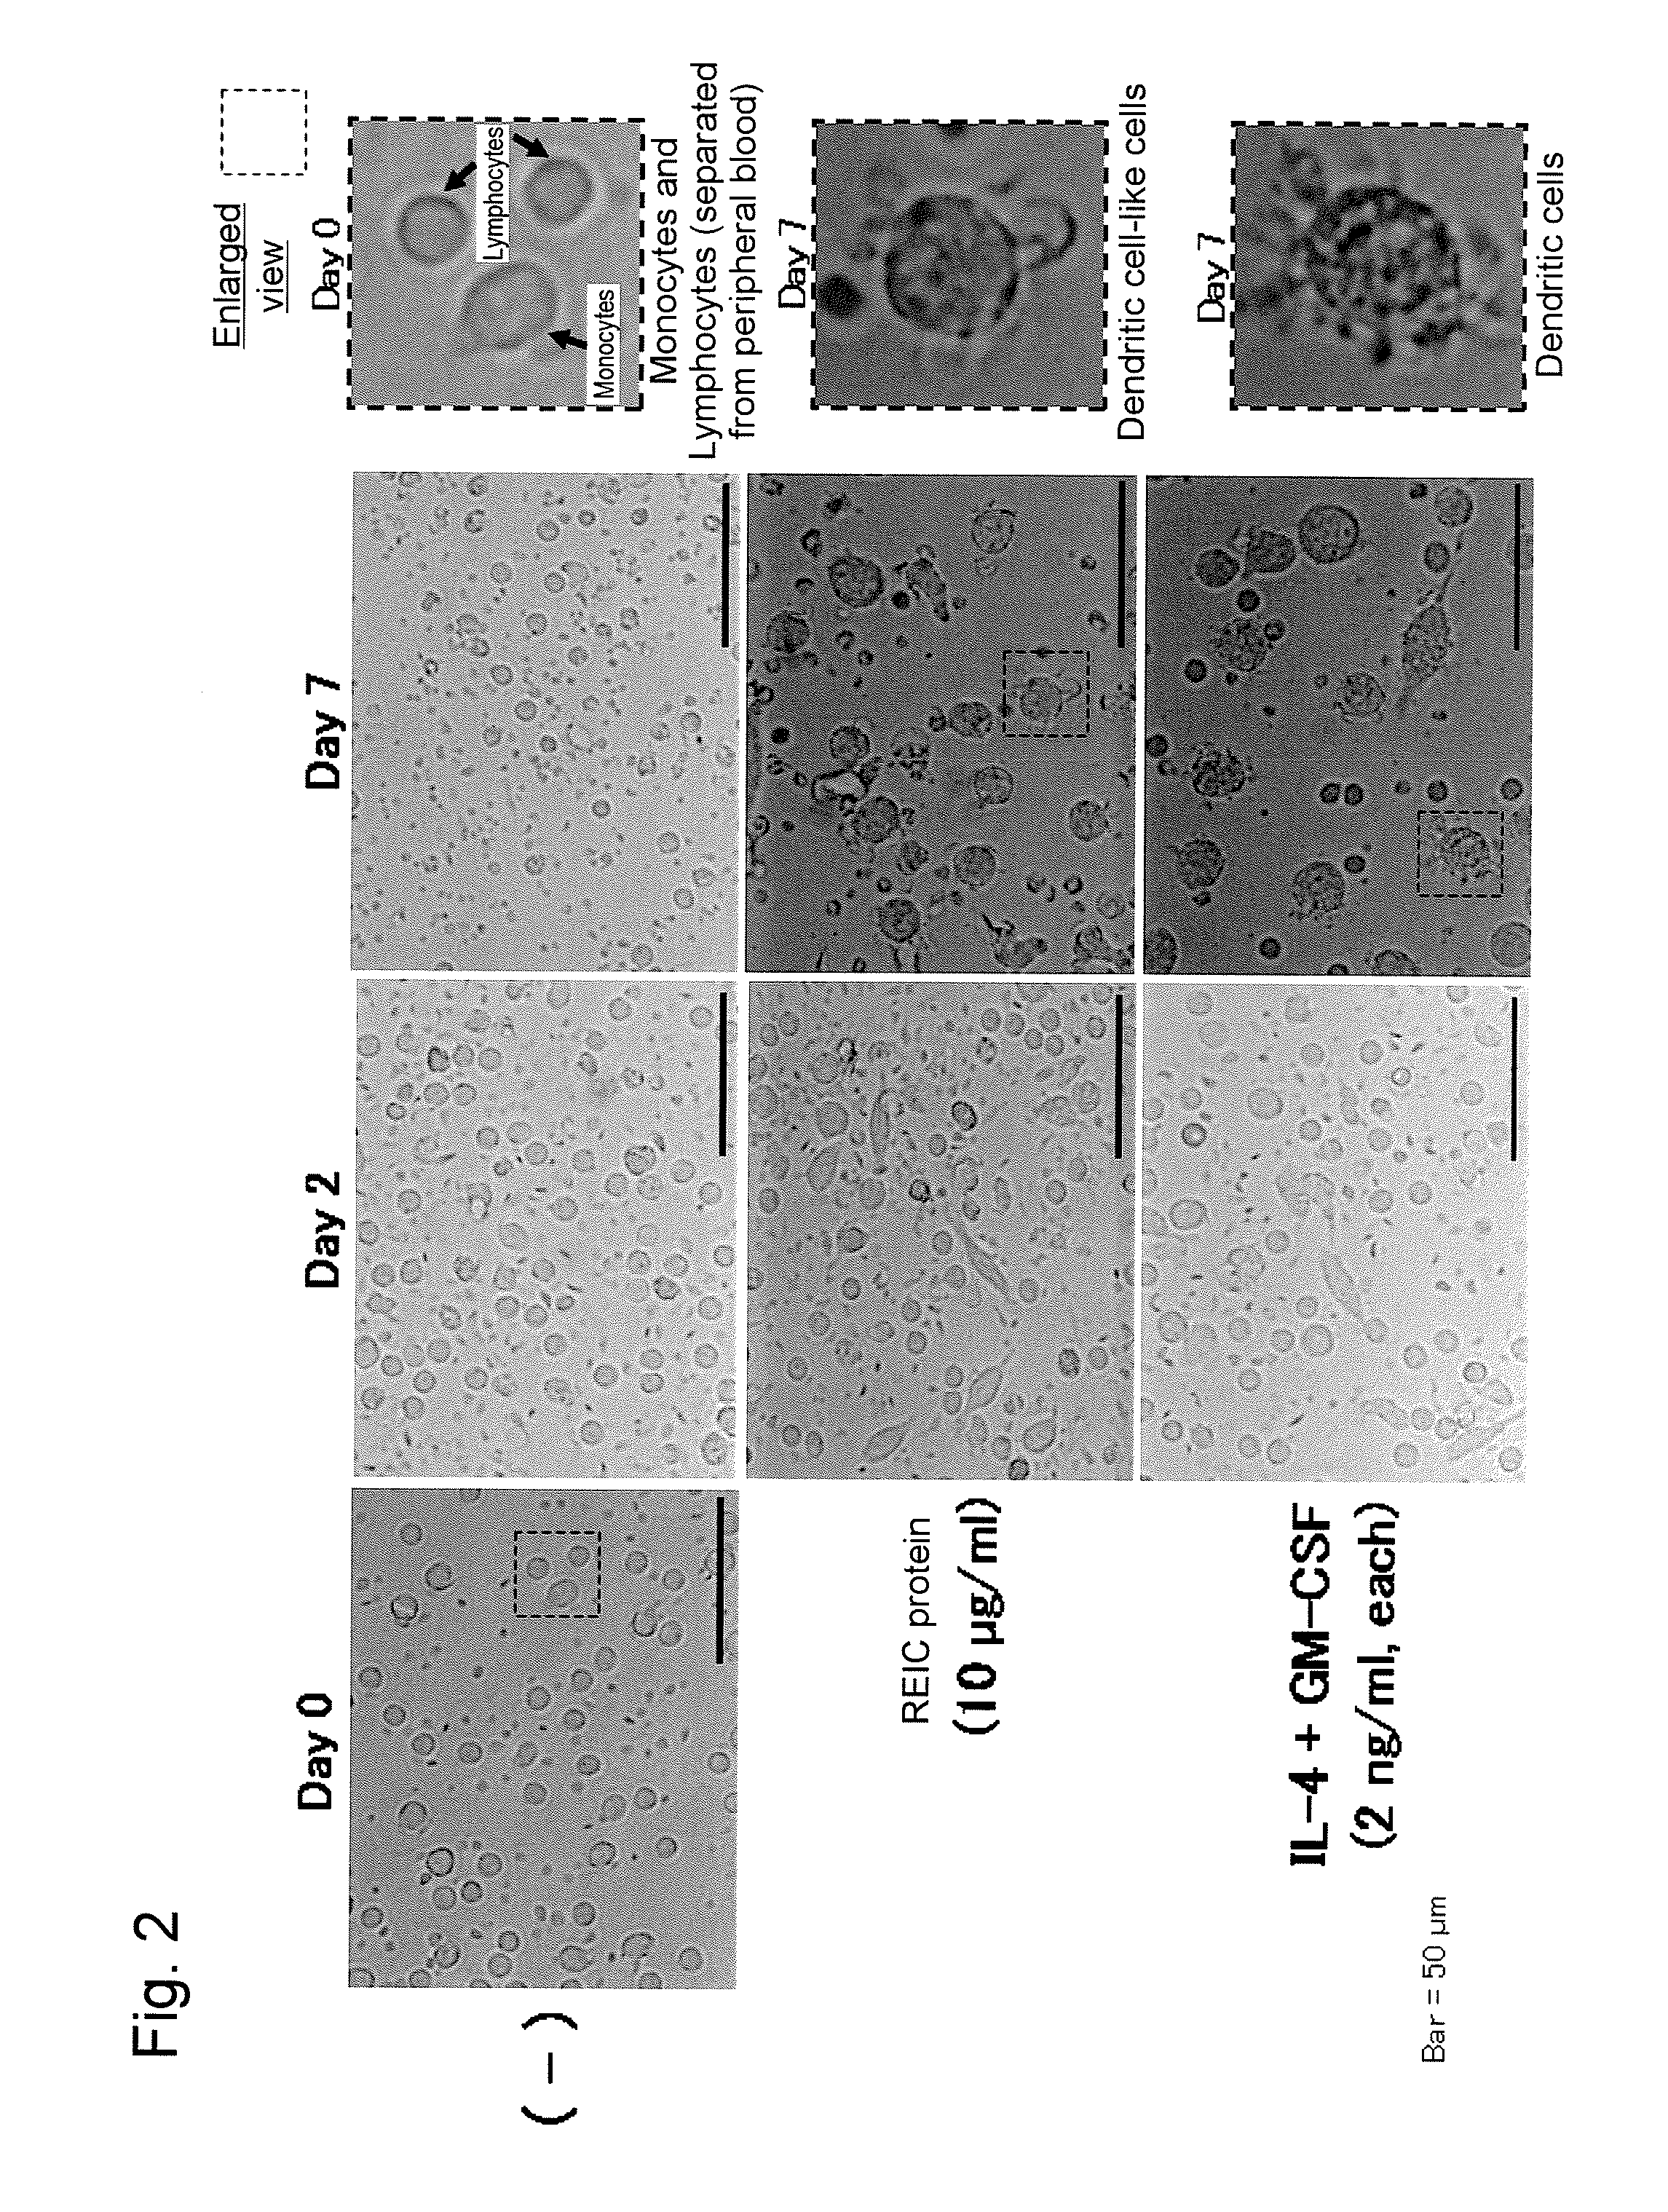 Pharmaceutical composition for treating or preventing cancer by inducing dendritic cell-like differentiation from monocytes to improve anticancer immune activity